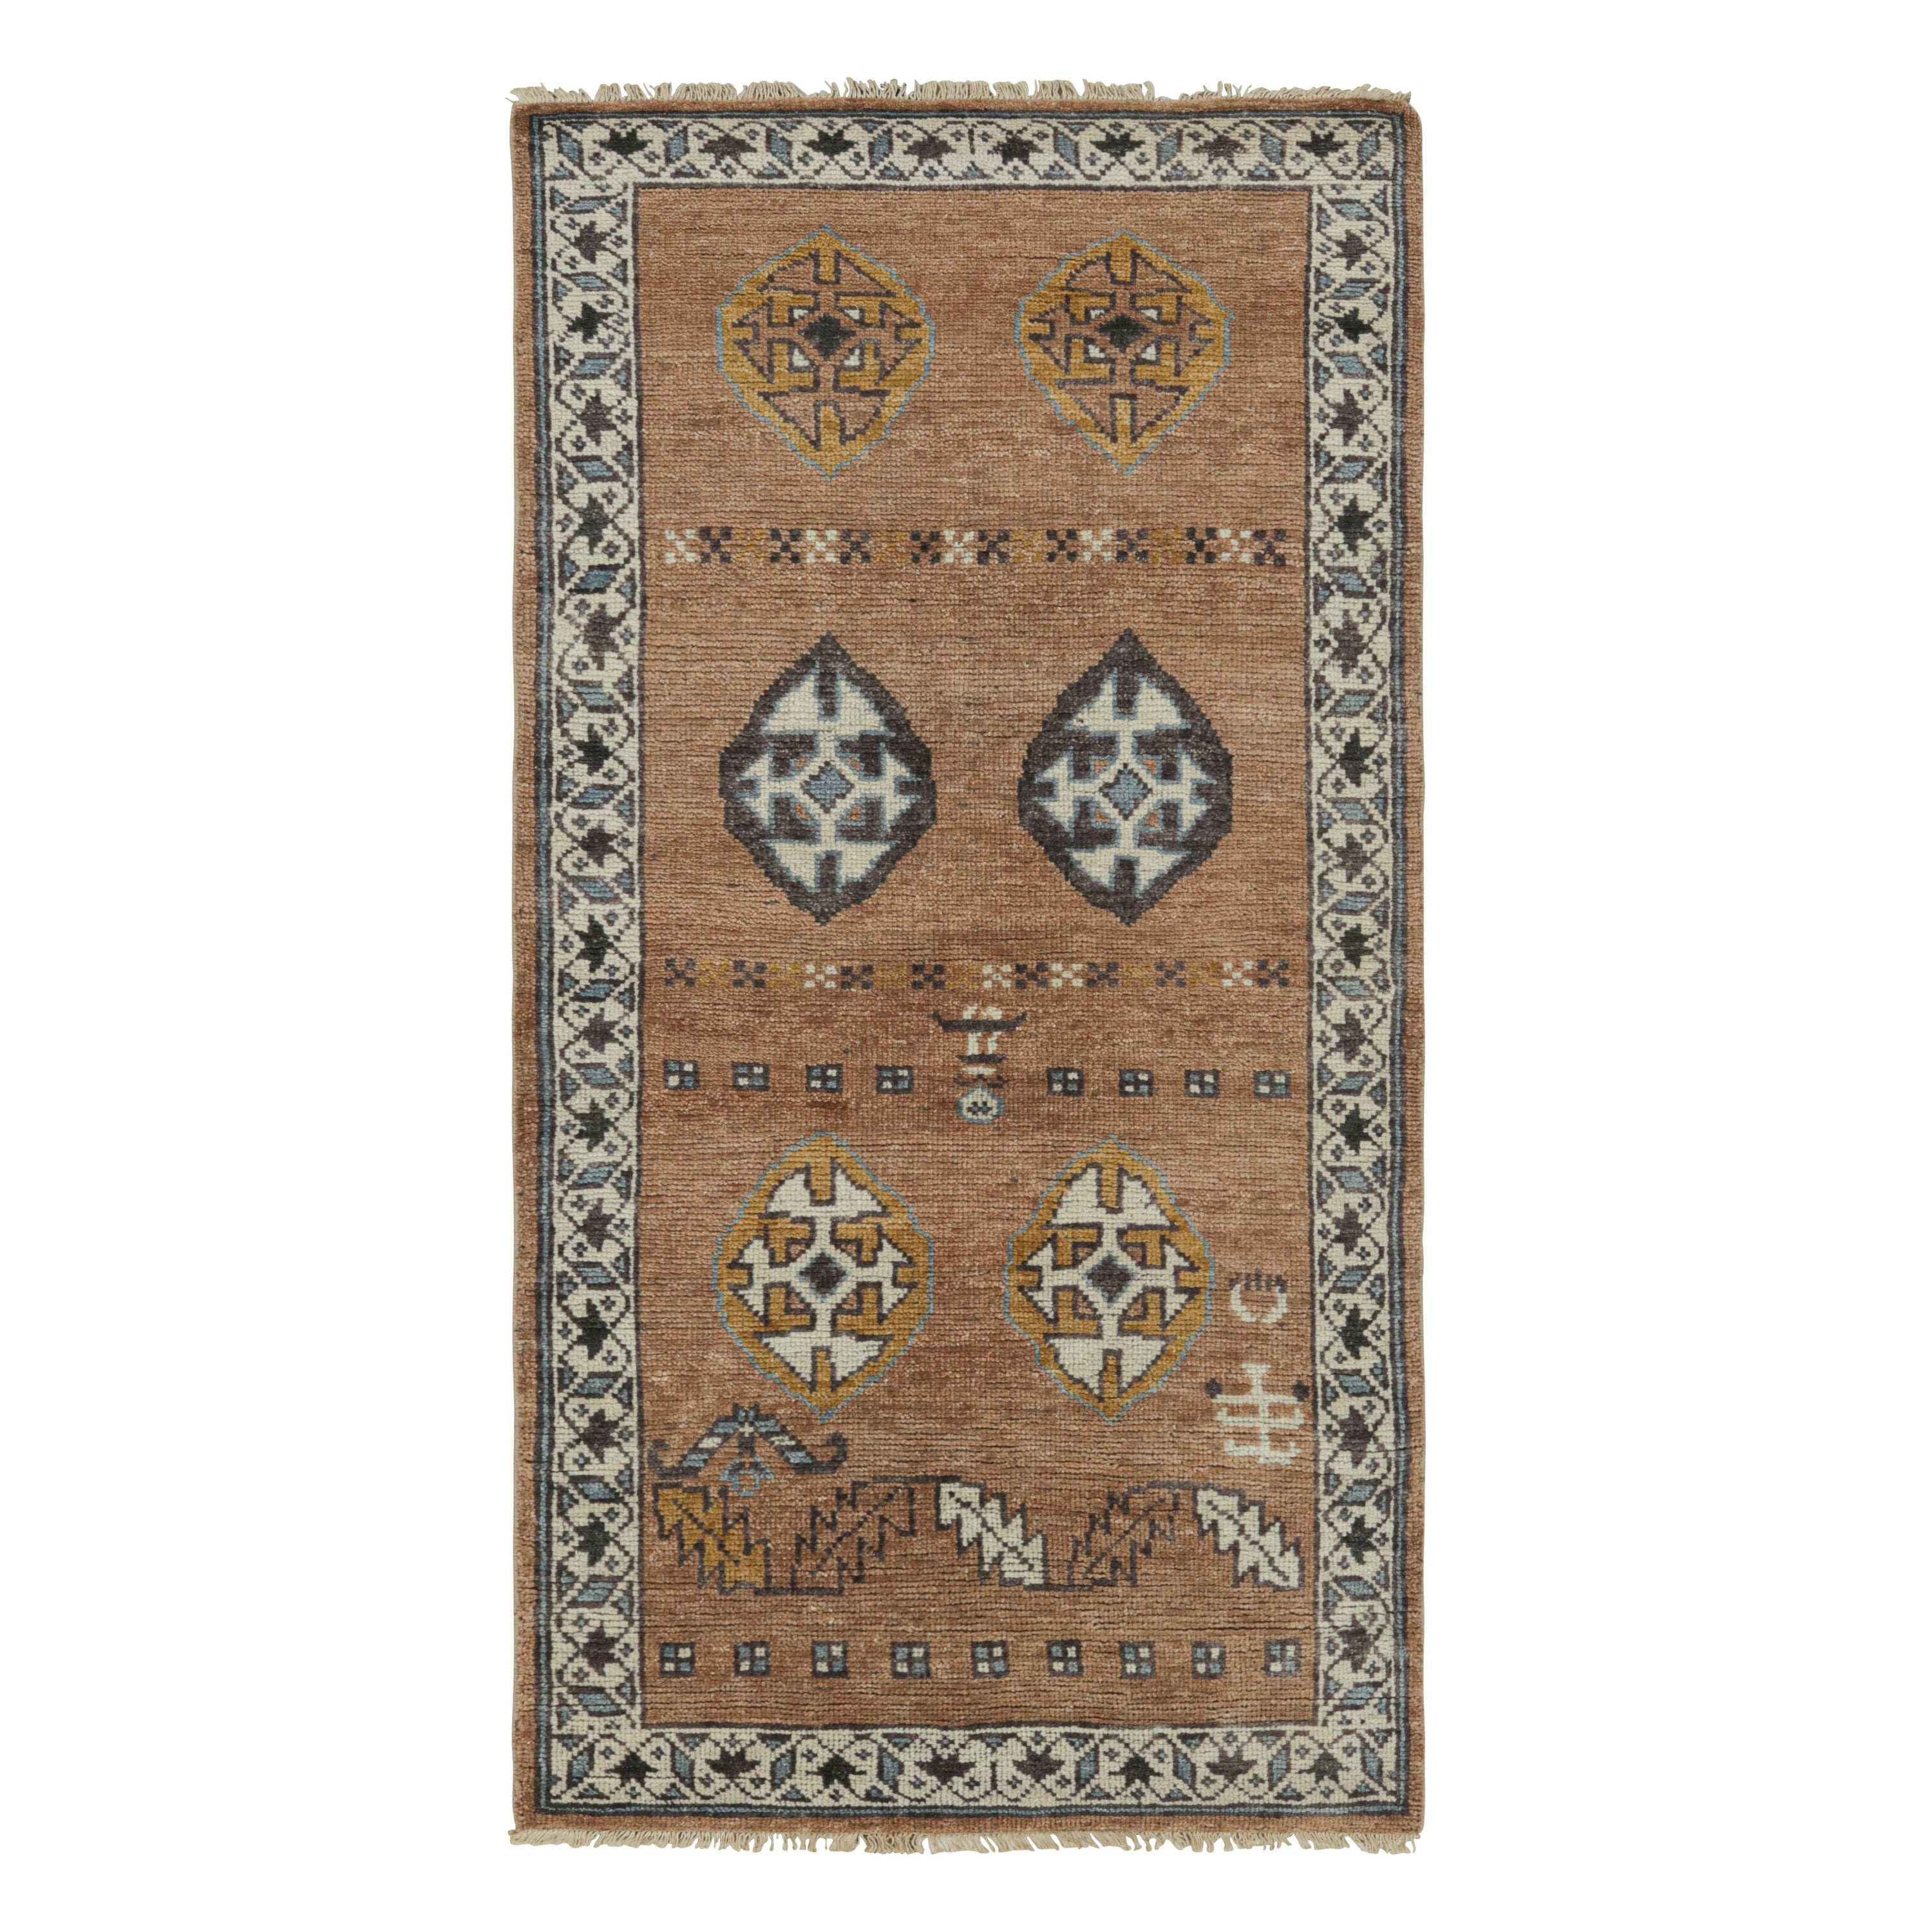 Rug & Kilim’s Brown Tribal Style Runner Rug with Primitivist Geometric Patterns For Sale